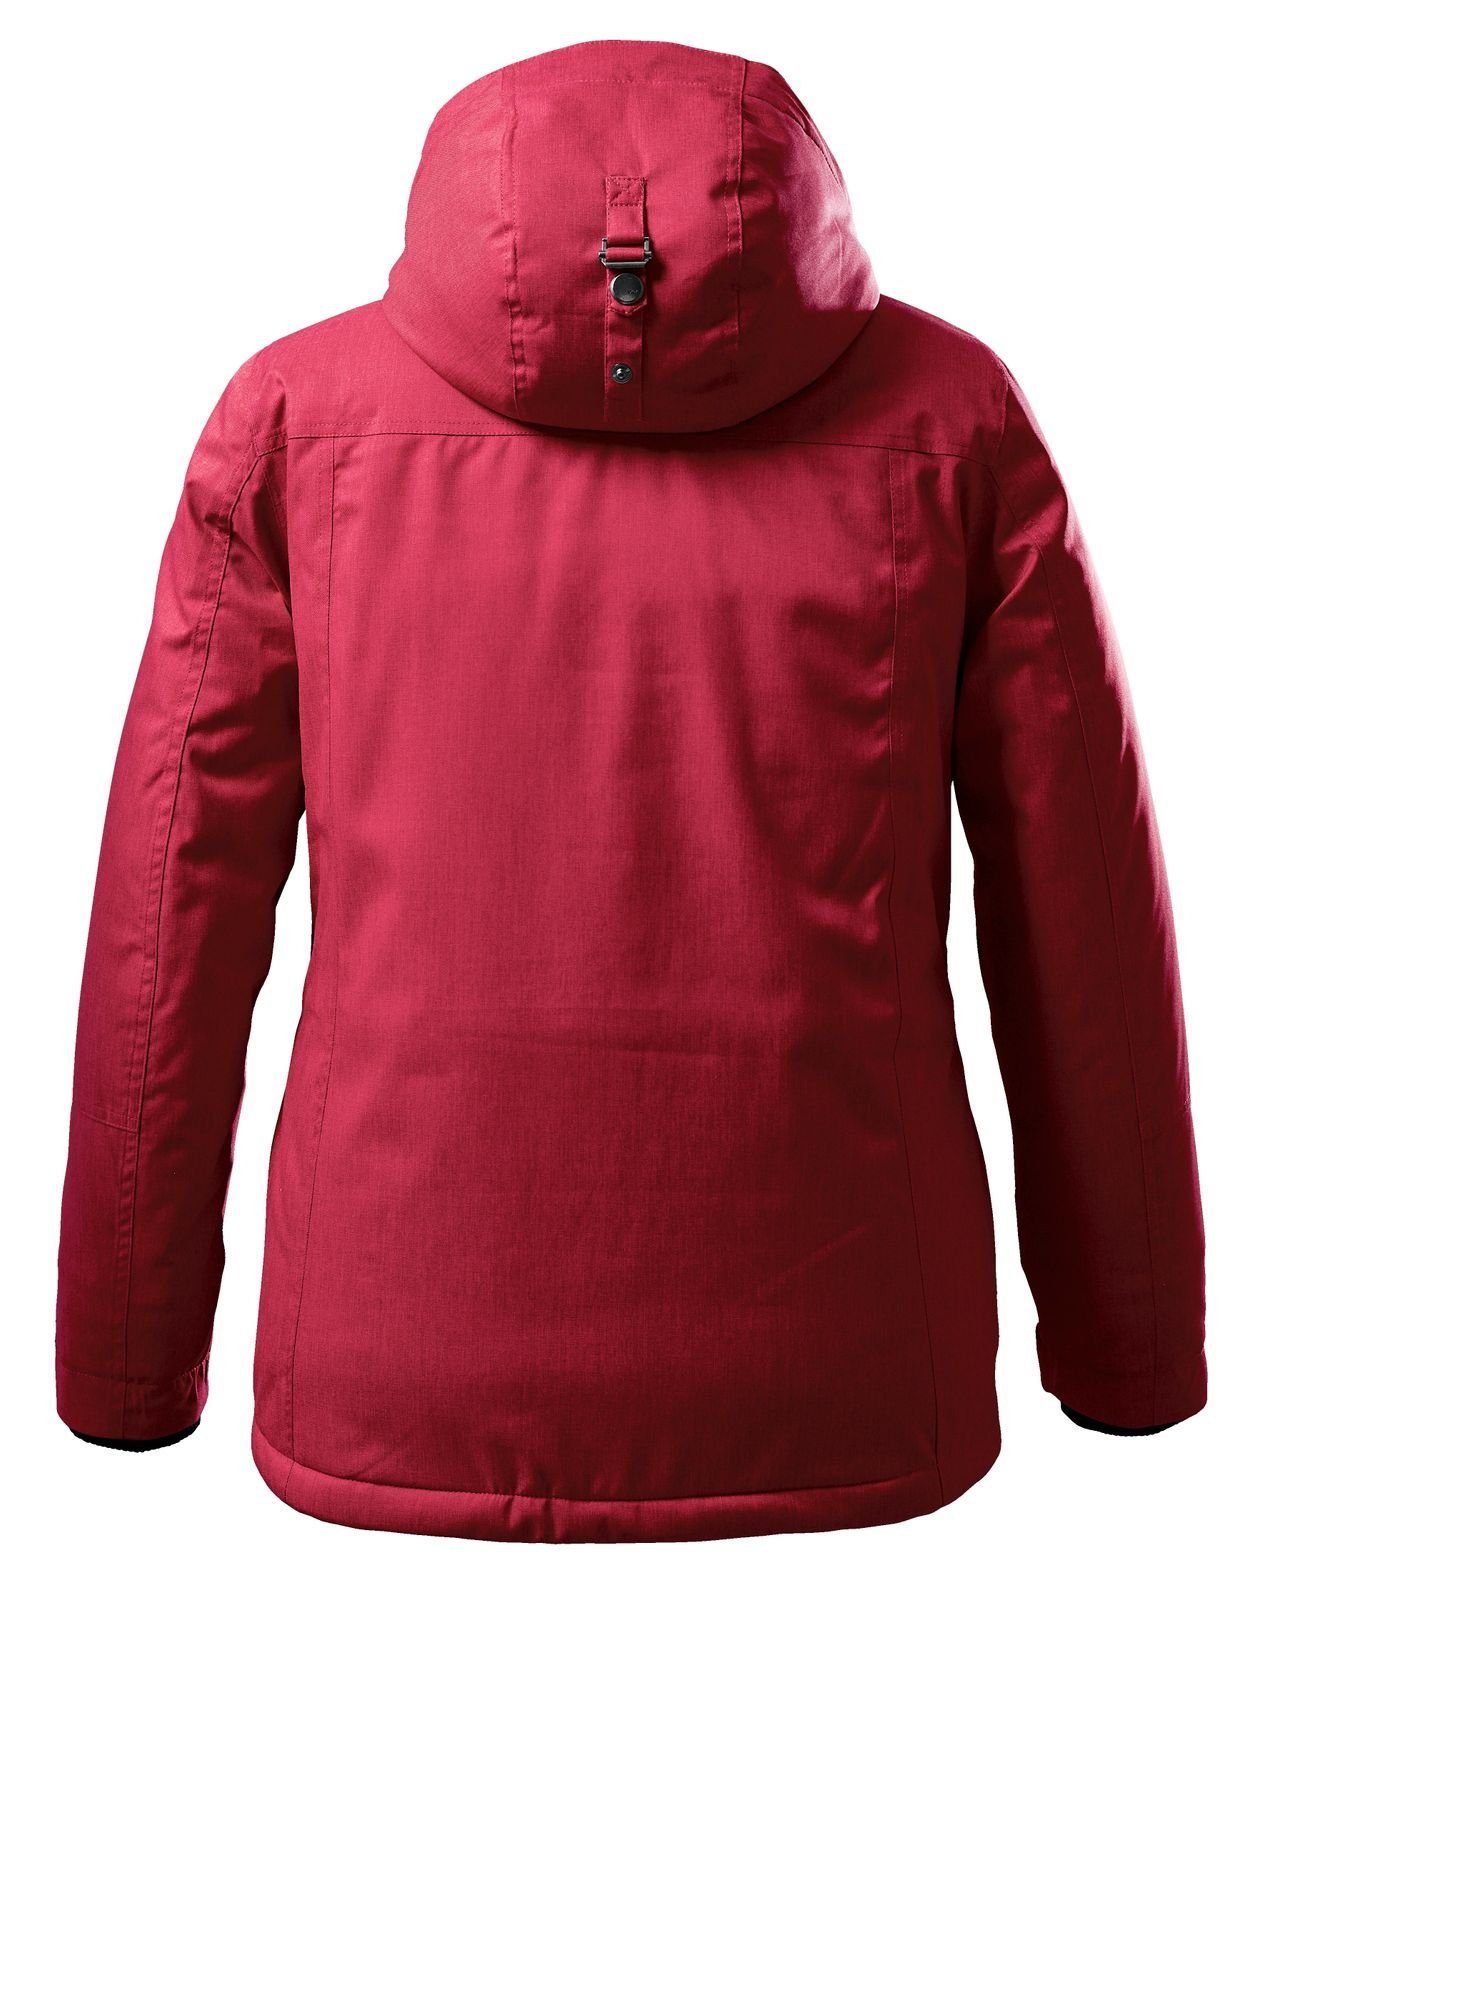 STOY deep red Parka 37340 (00405)